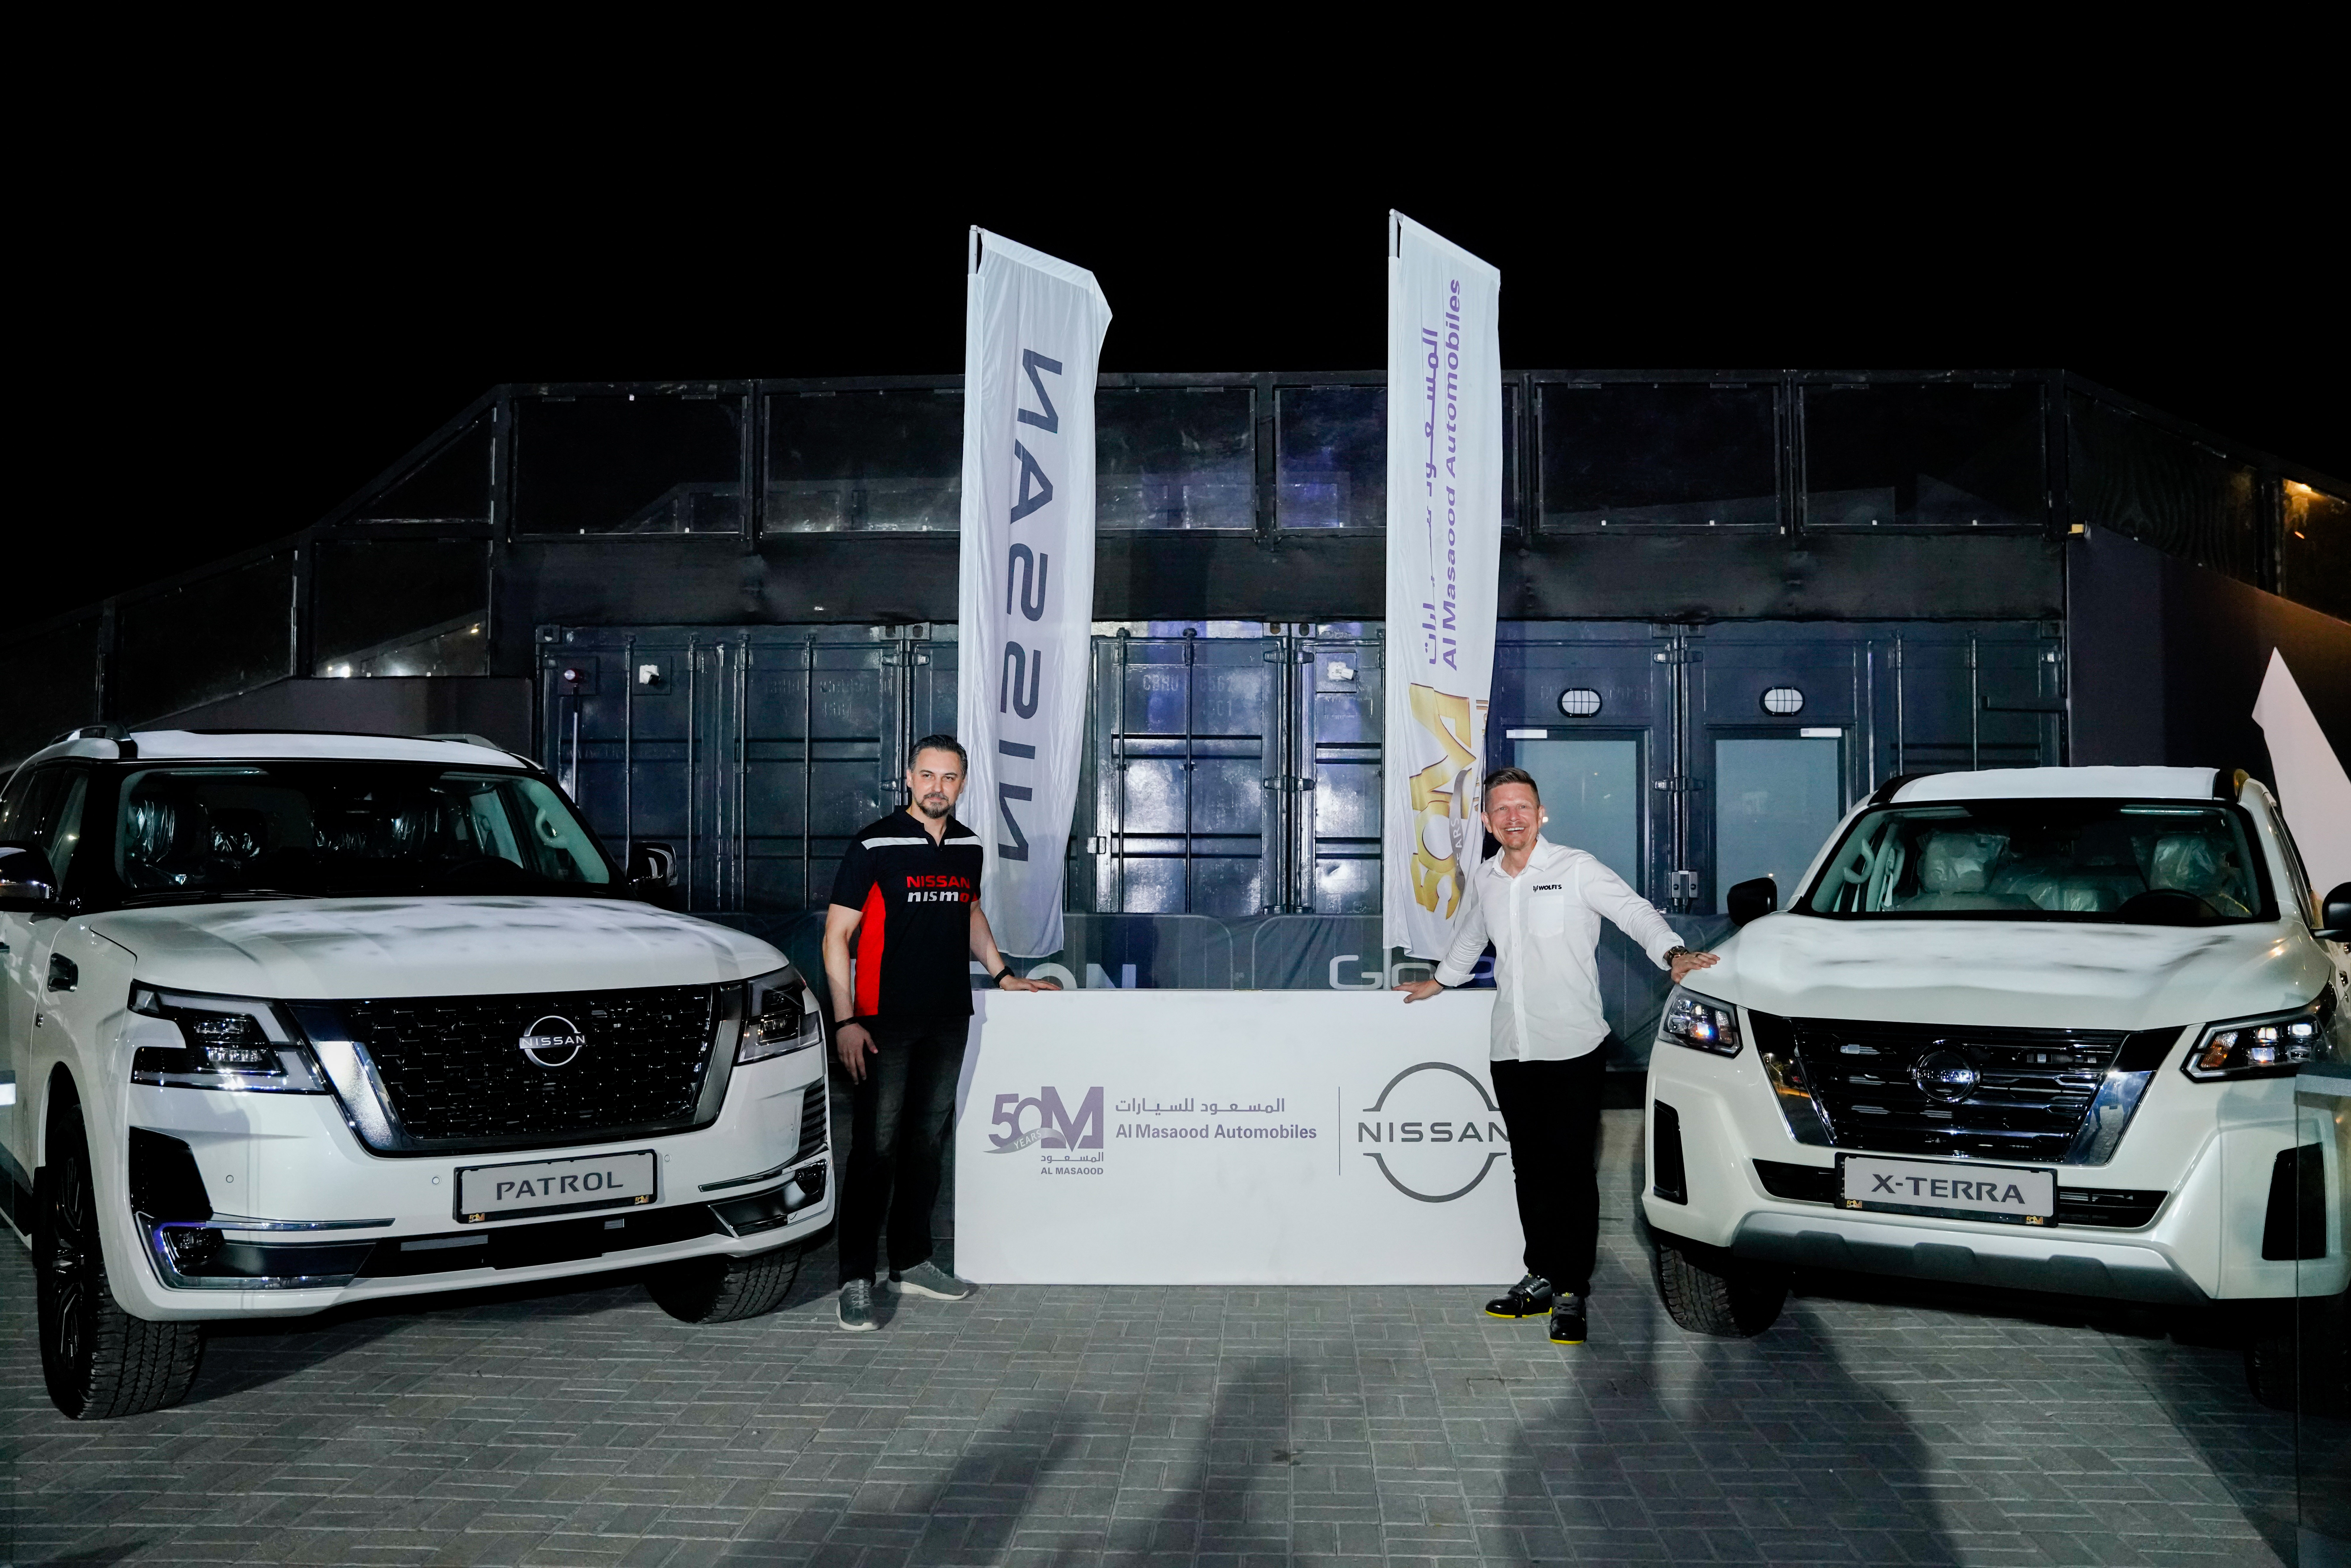 Al Masaood Automobiles-Nissan Joined UCI Mountain Bike Eliminator World Cup as Mobility Partner